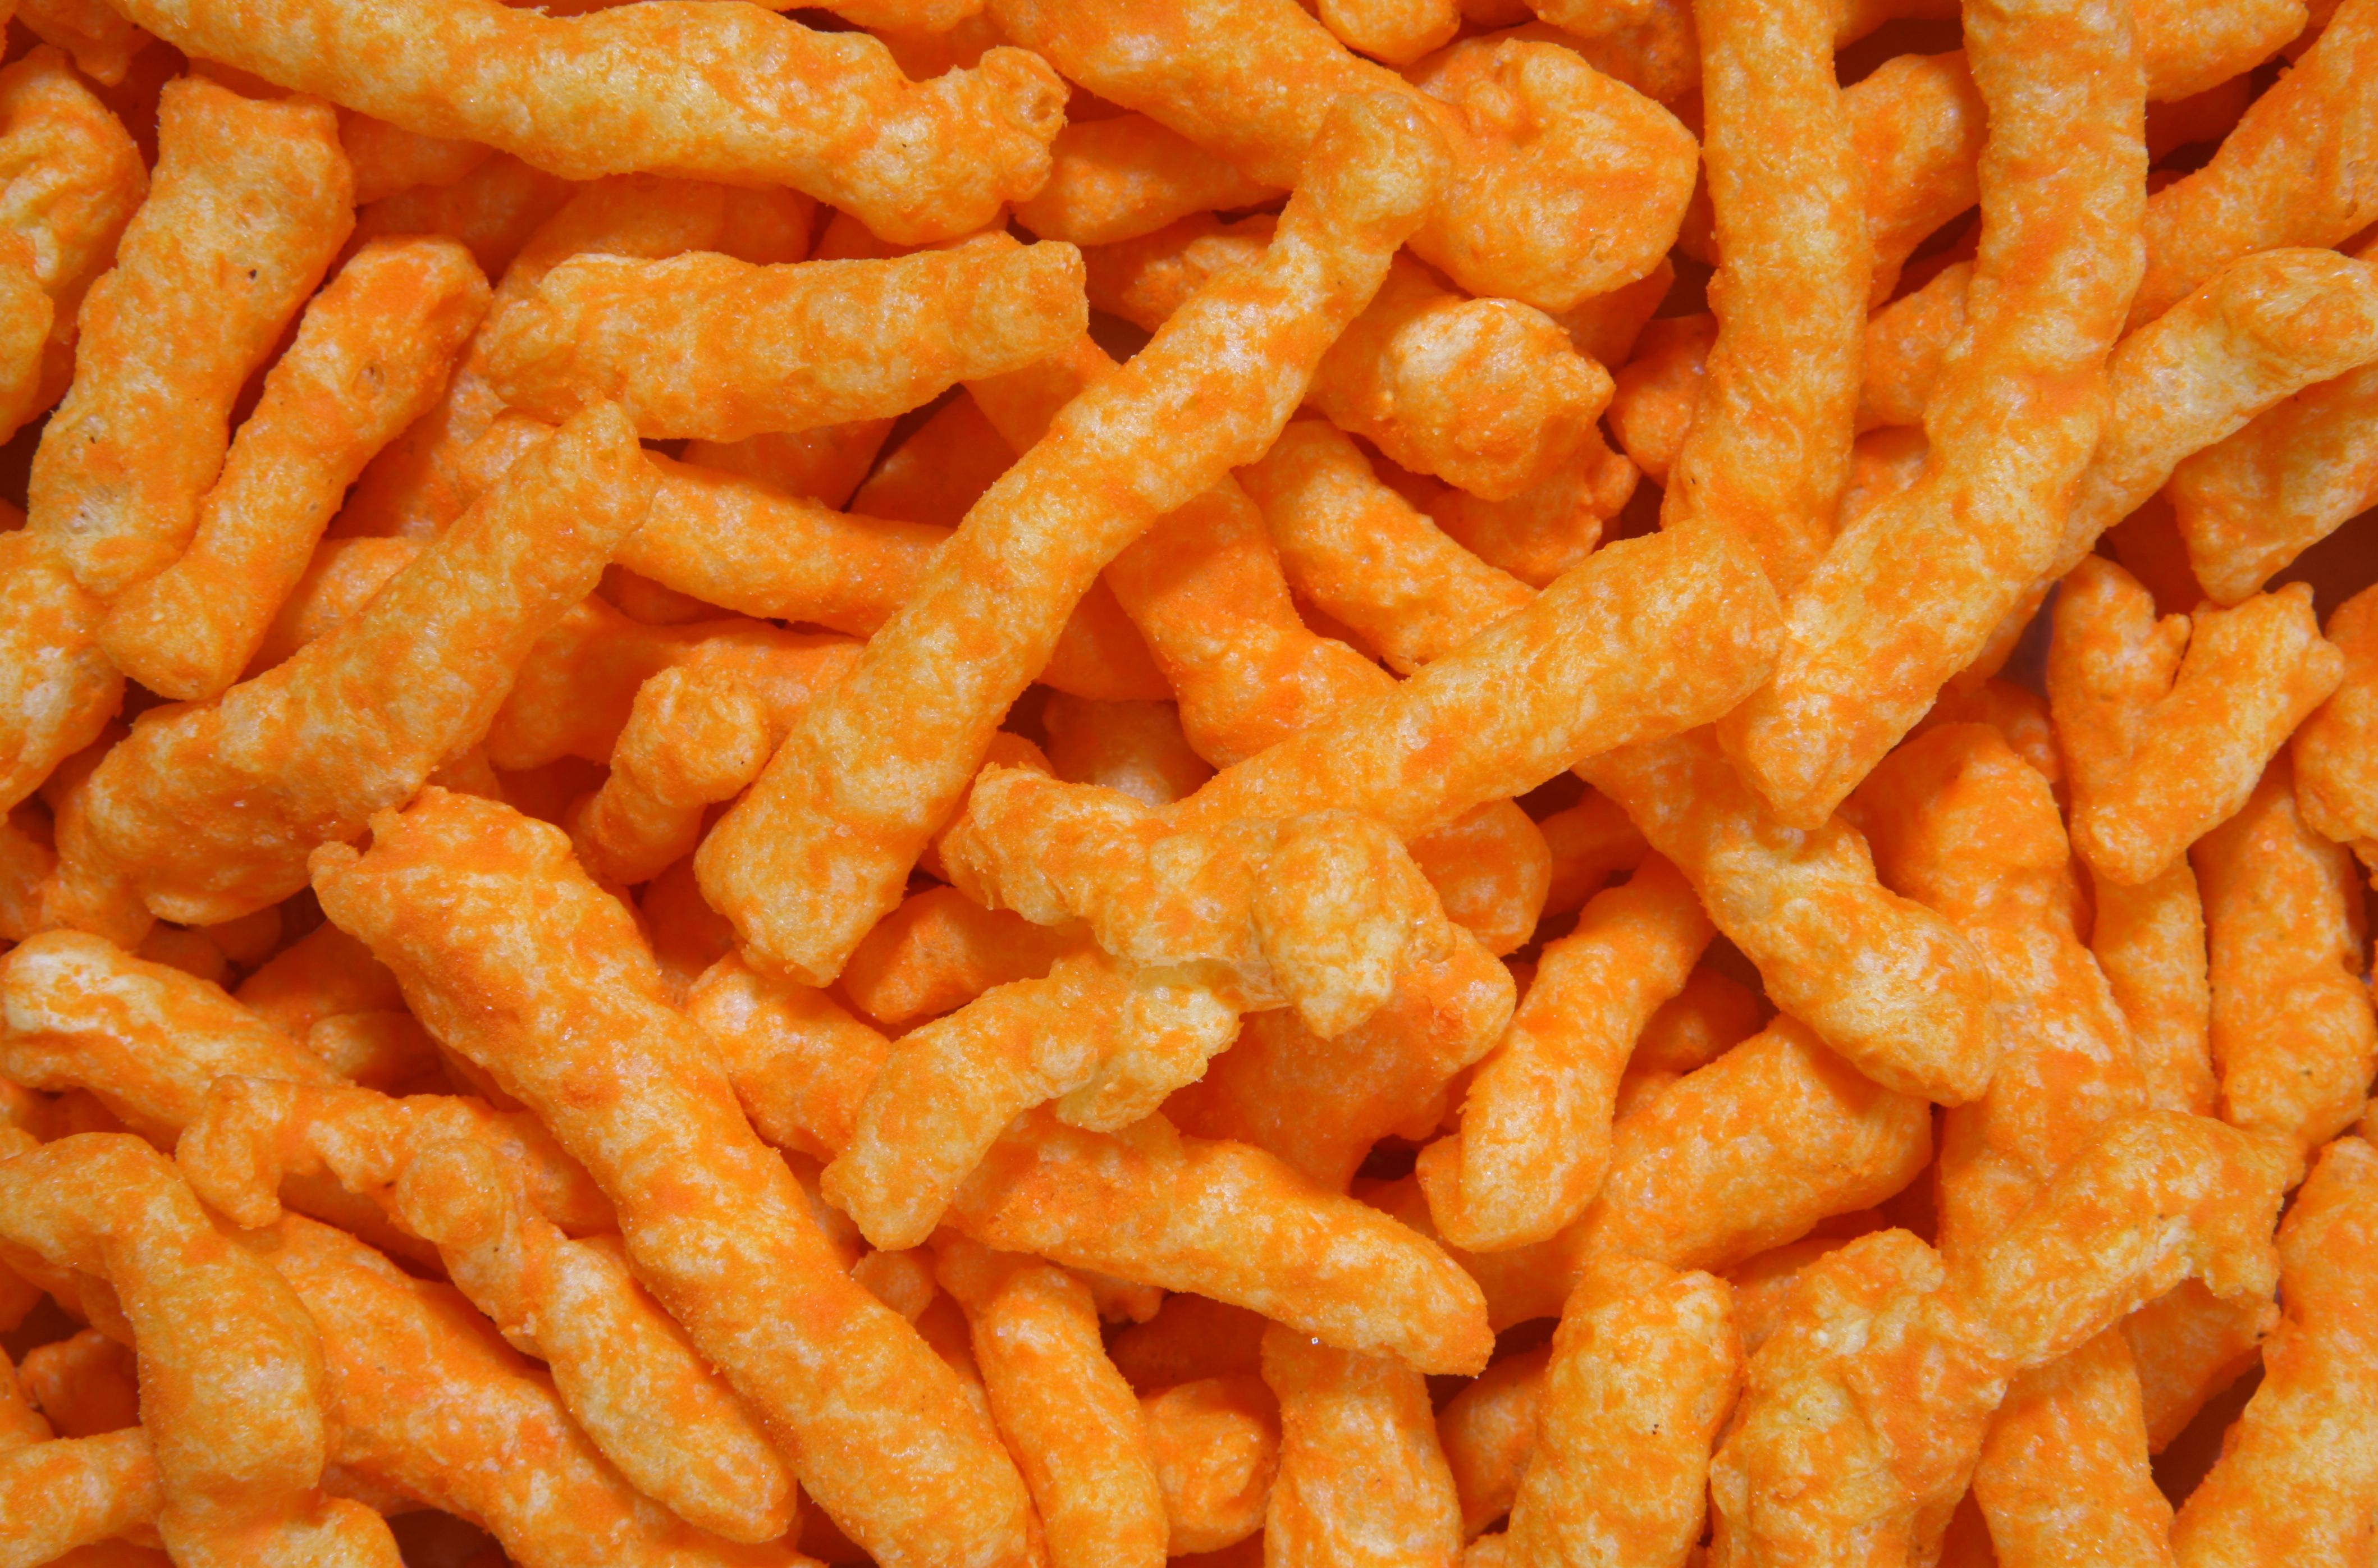 Cheetos Wallpapers Image Group.